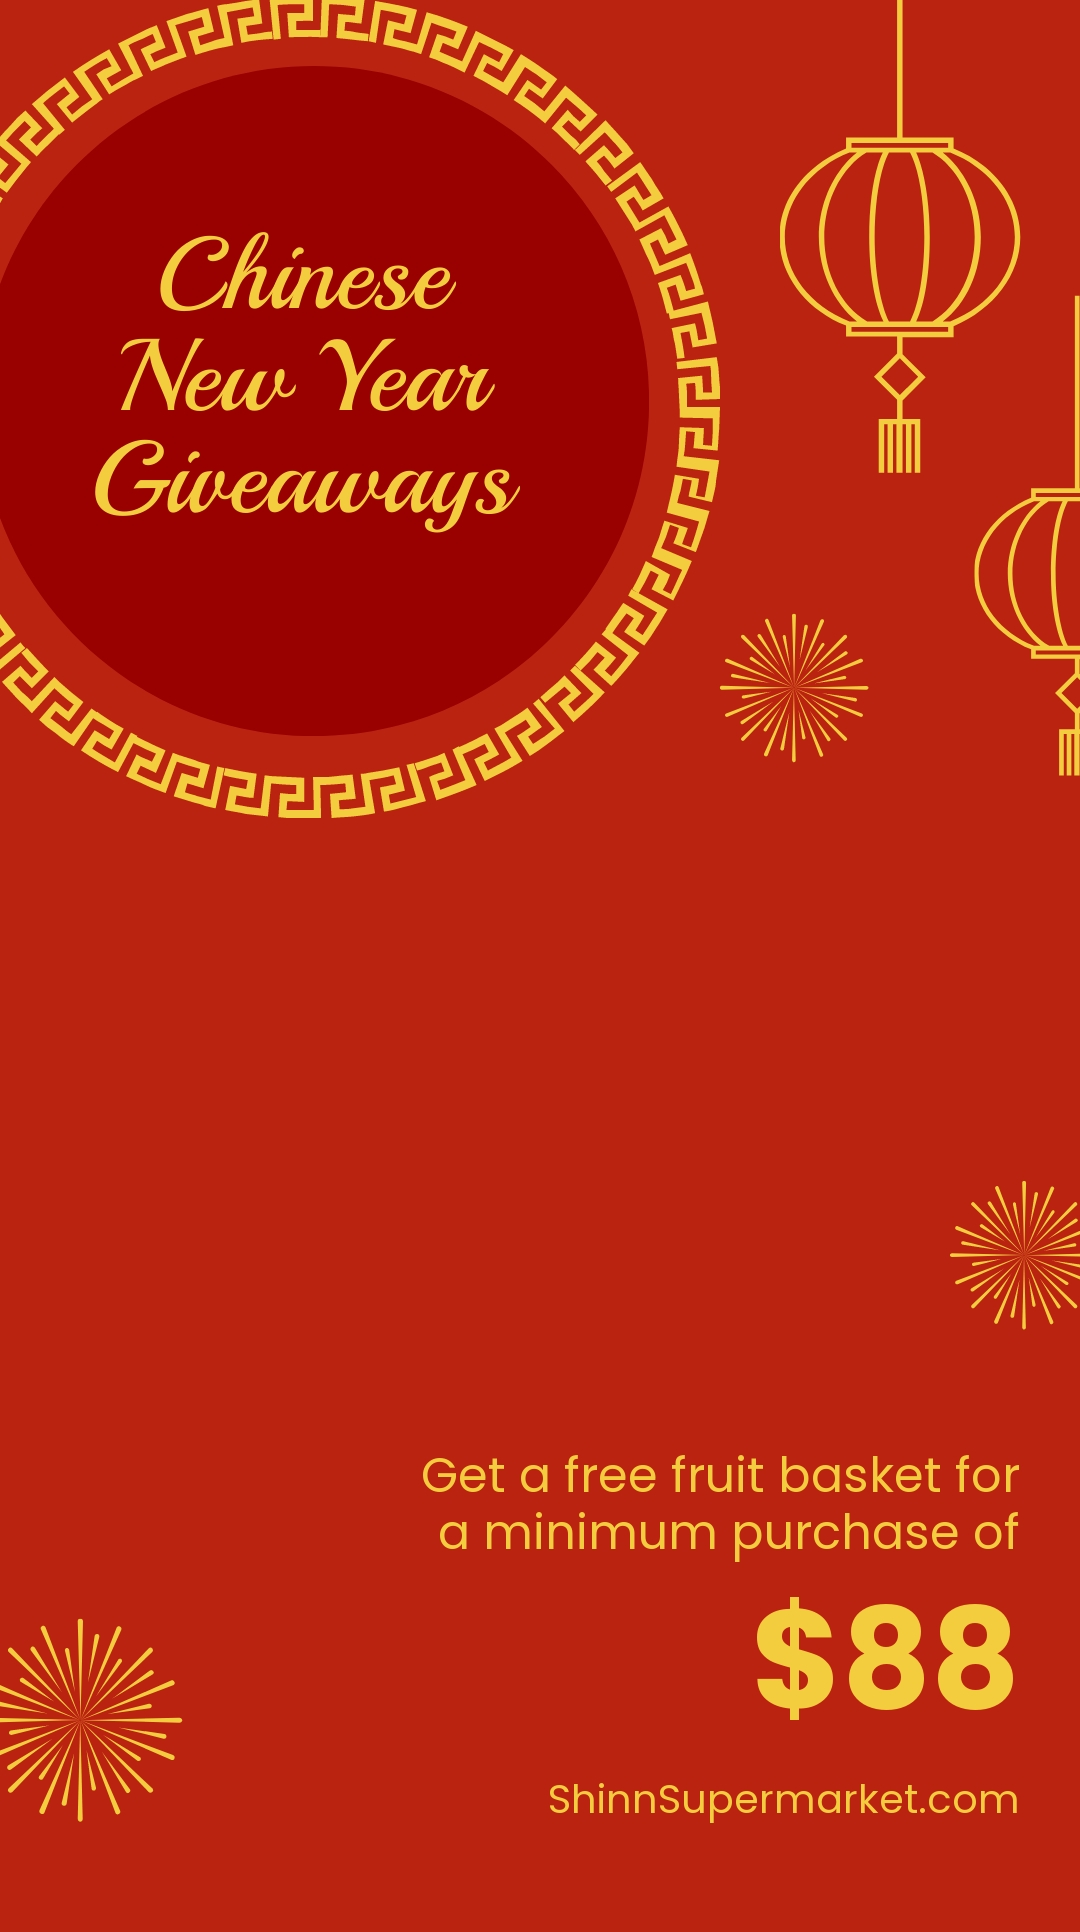 Chinese New Year Giveaway Snapchat Geofilter Template.jpe